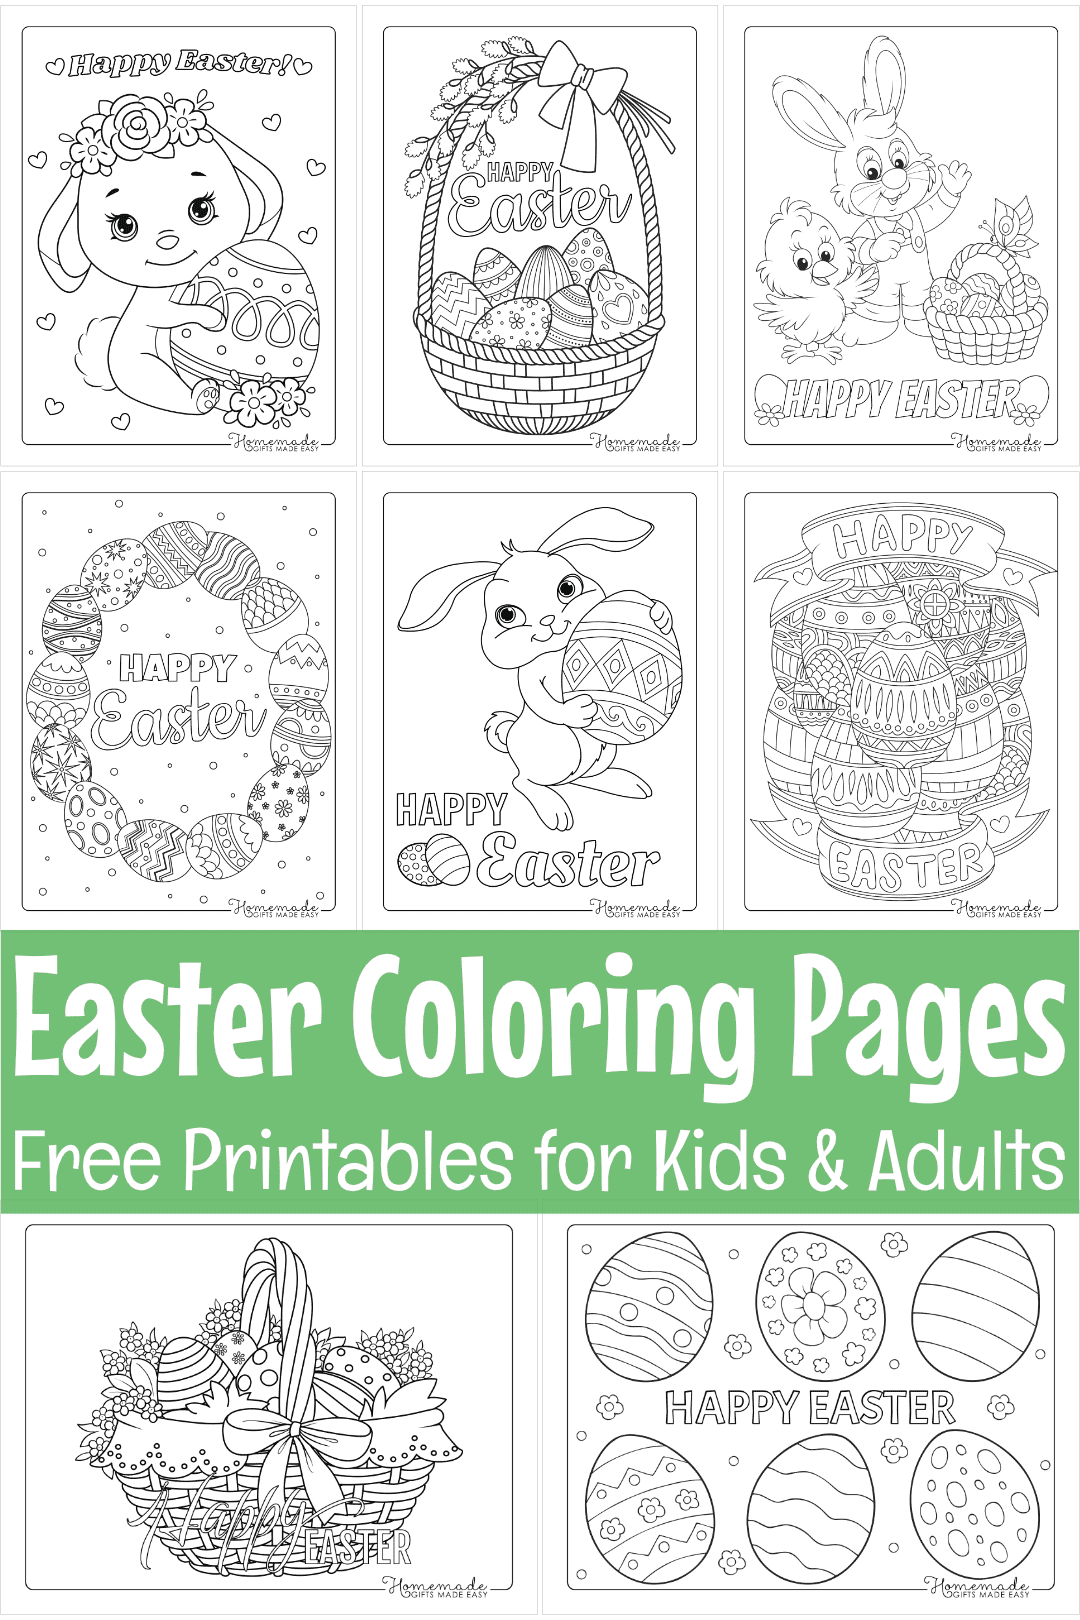 Free easter coloring pages for kids adults